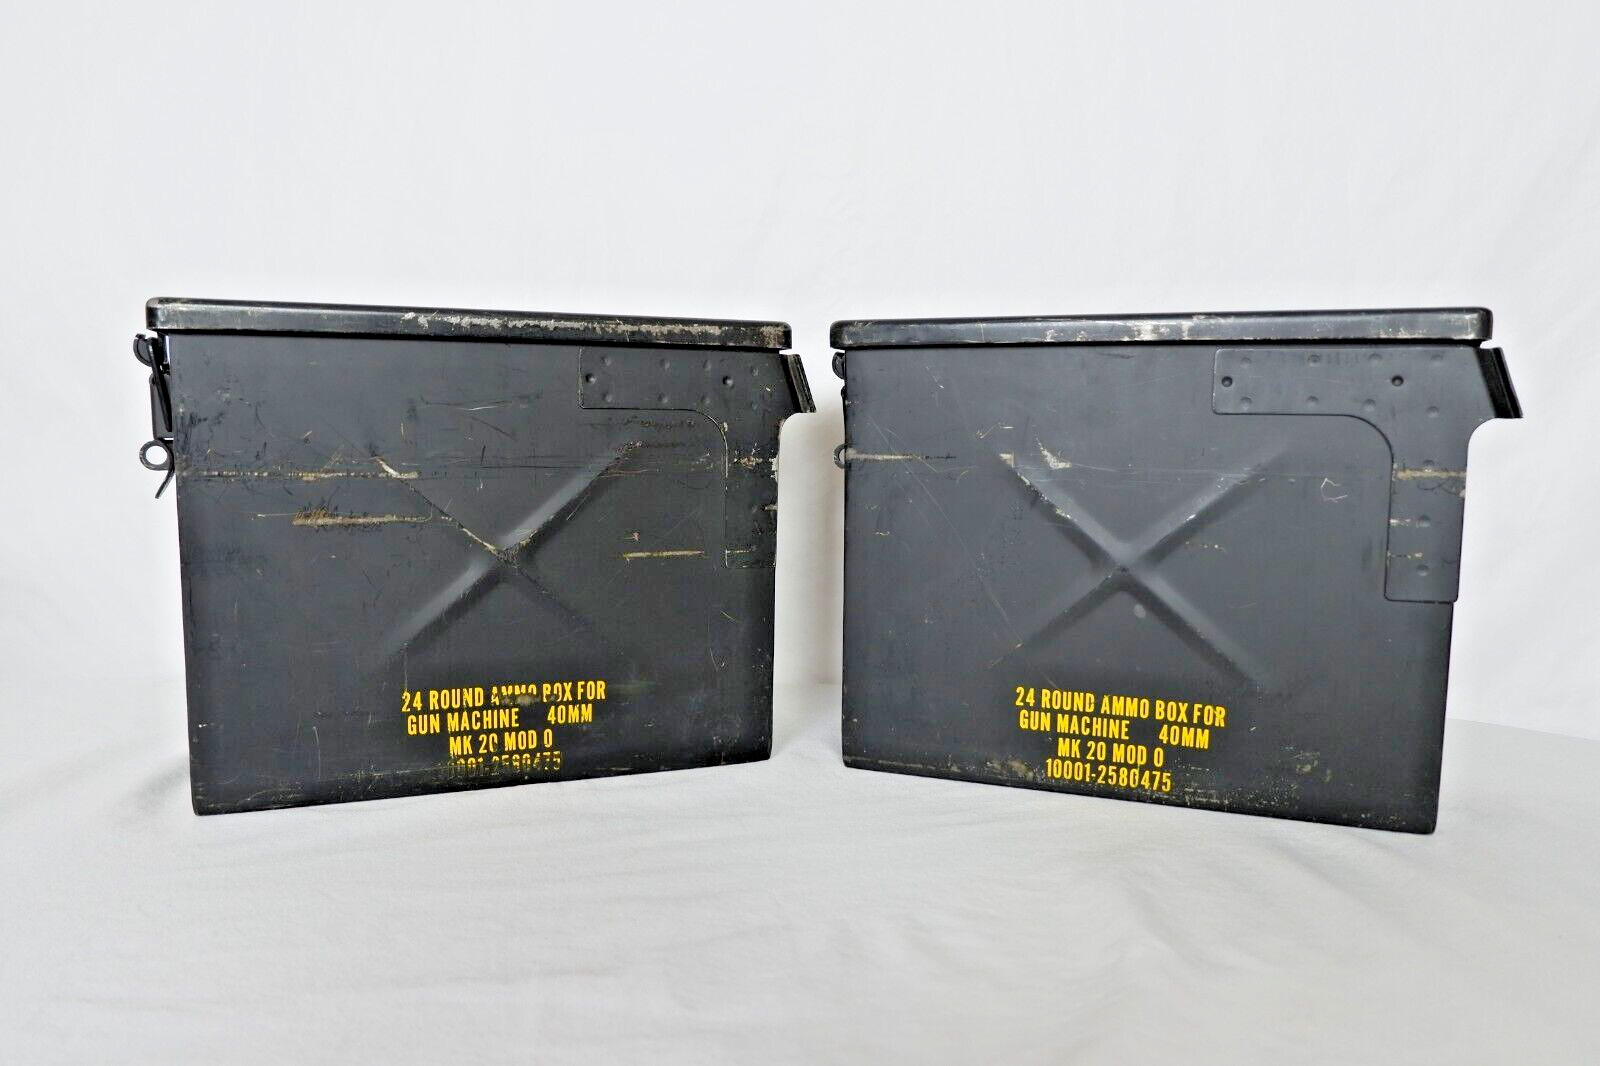 Two (2) Rare 40mm Grenade Ammo Cans MK 20 MOD 0 #10001-2580475